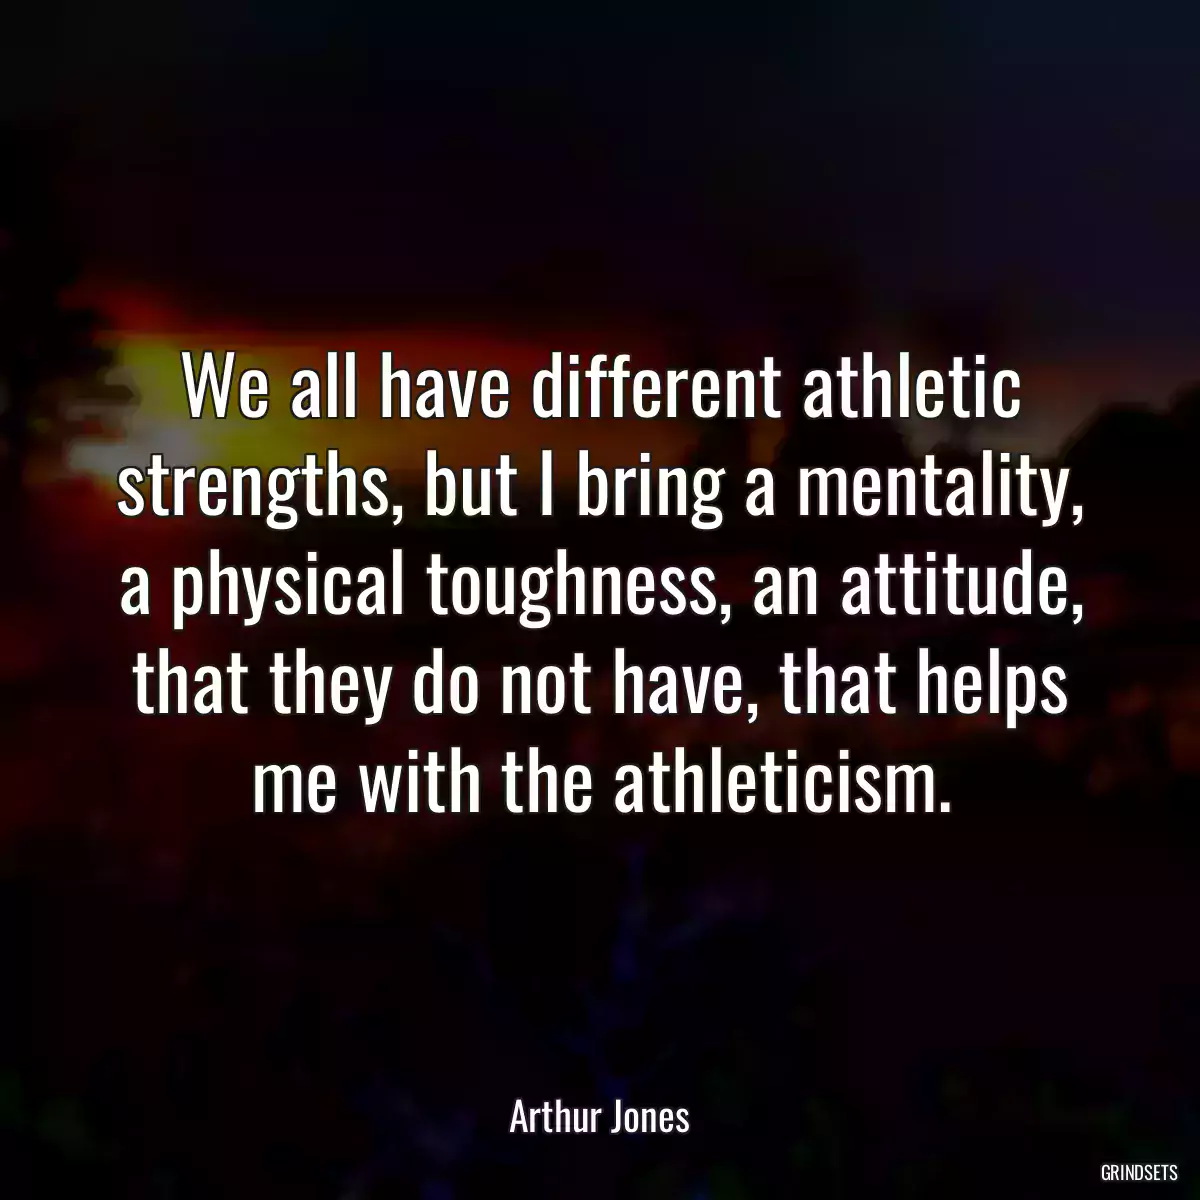 We all have different athletic strengths, but I bring a mentality, a physical toughness, an attitude, that they do not have, that helps me with the athleticism.